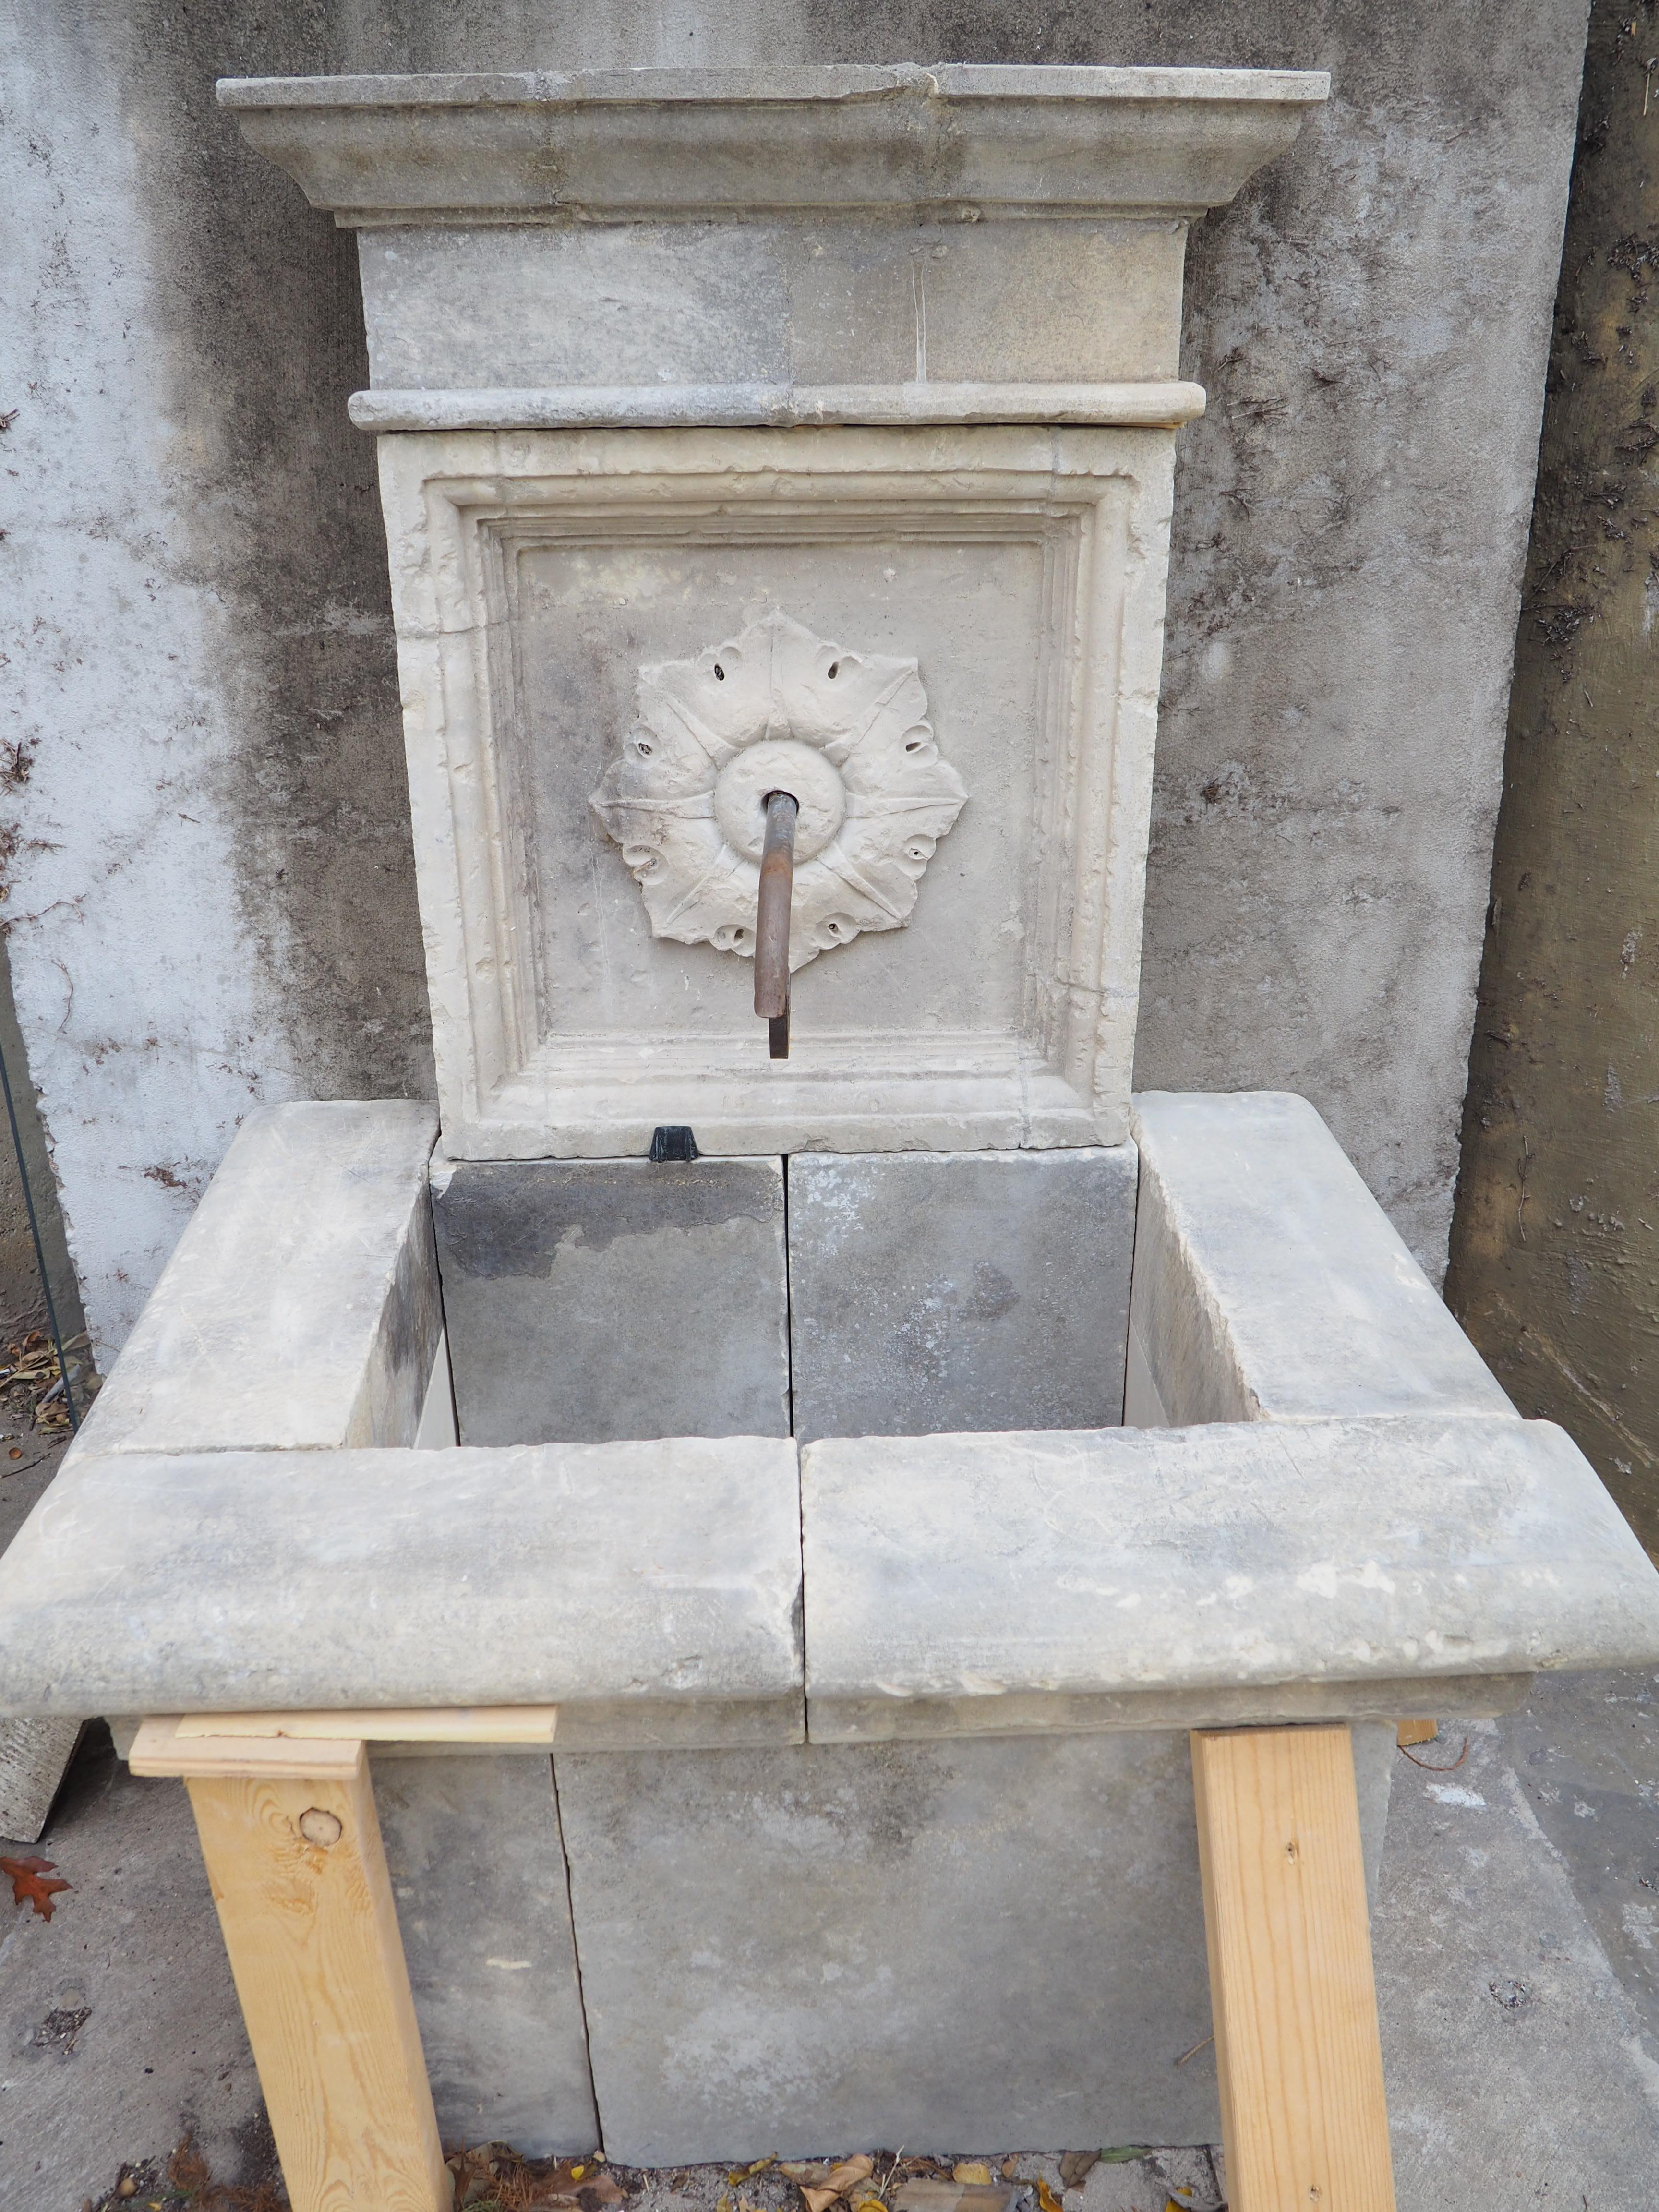 Consisting of 12 pieces of hand-carved limestone, this small patinated wall fountain was produced in Southern Italy. The top cornice features several layers of molding, including quarter round and cavetto edges. Beneath the top section is a square